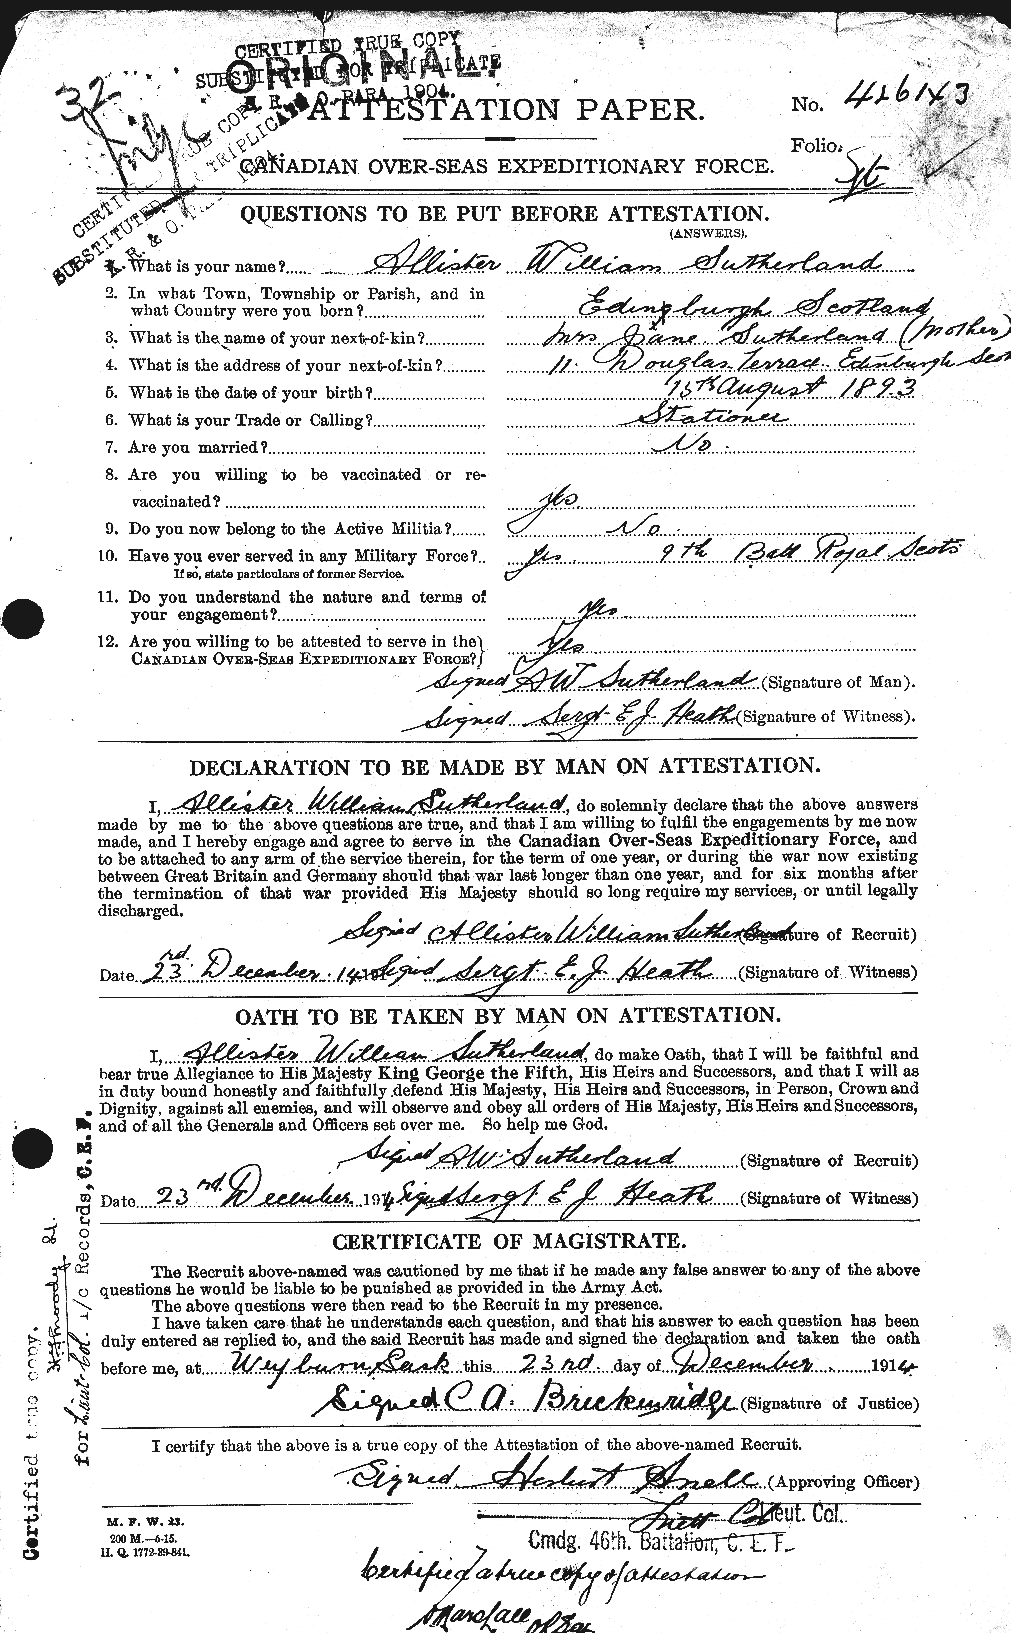 Personnel Records of the First World War - CEF 125334a